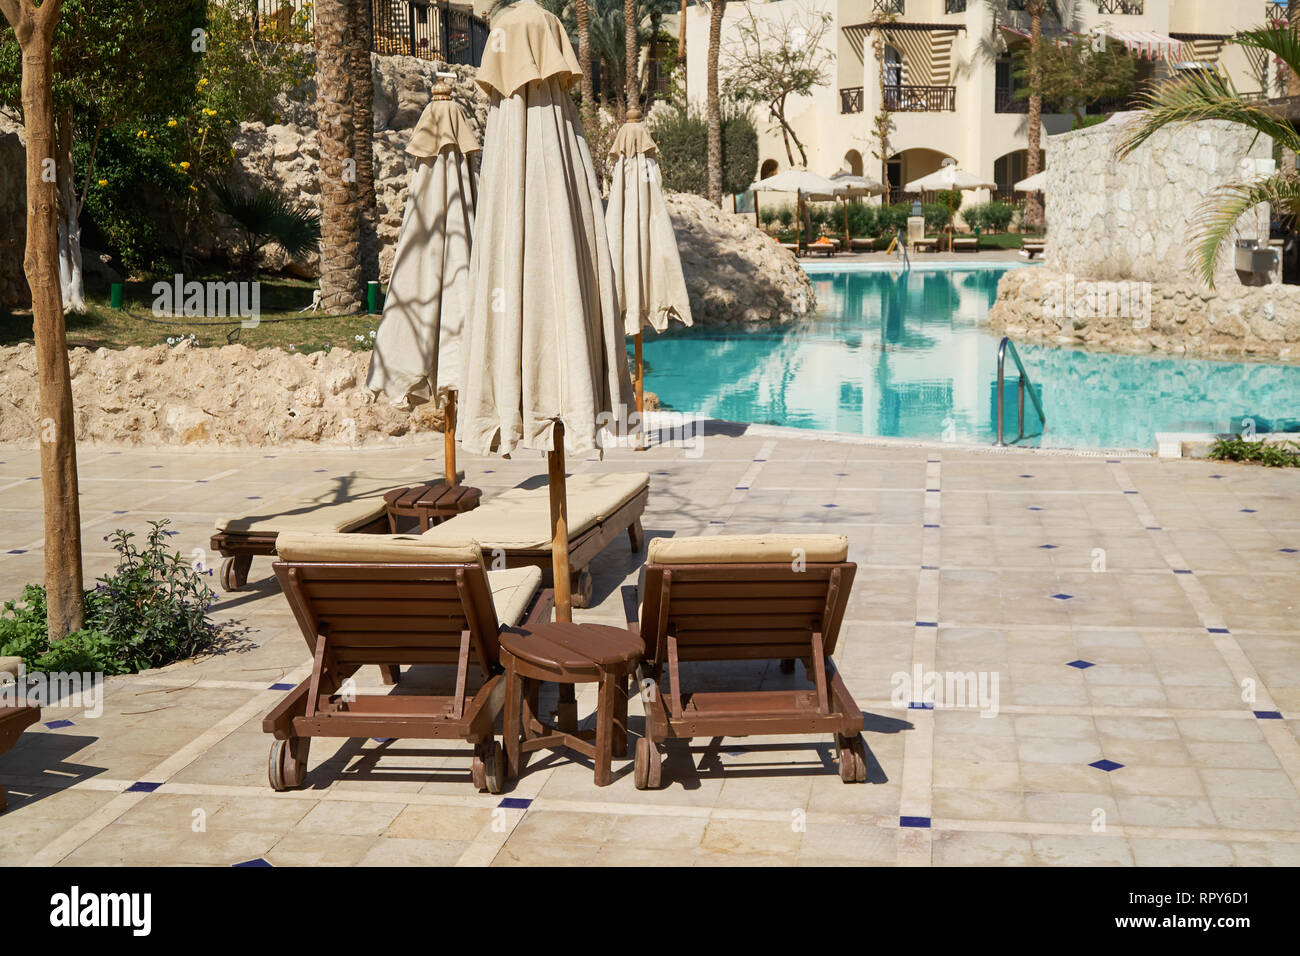 Sharm El Sheikh, Egypt - February 9, 2019: Five-star The Grand Hotel with palms and loungers near swimming pool in territory summer Stock Photo